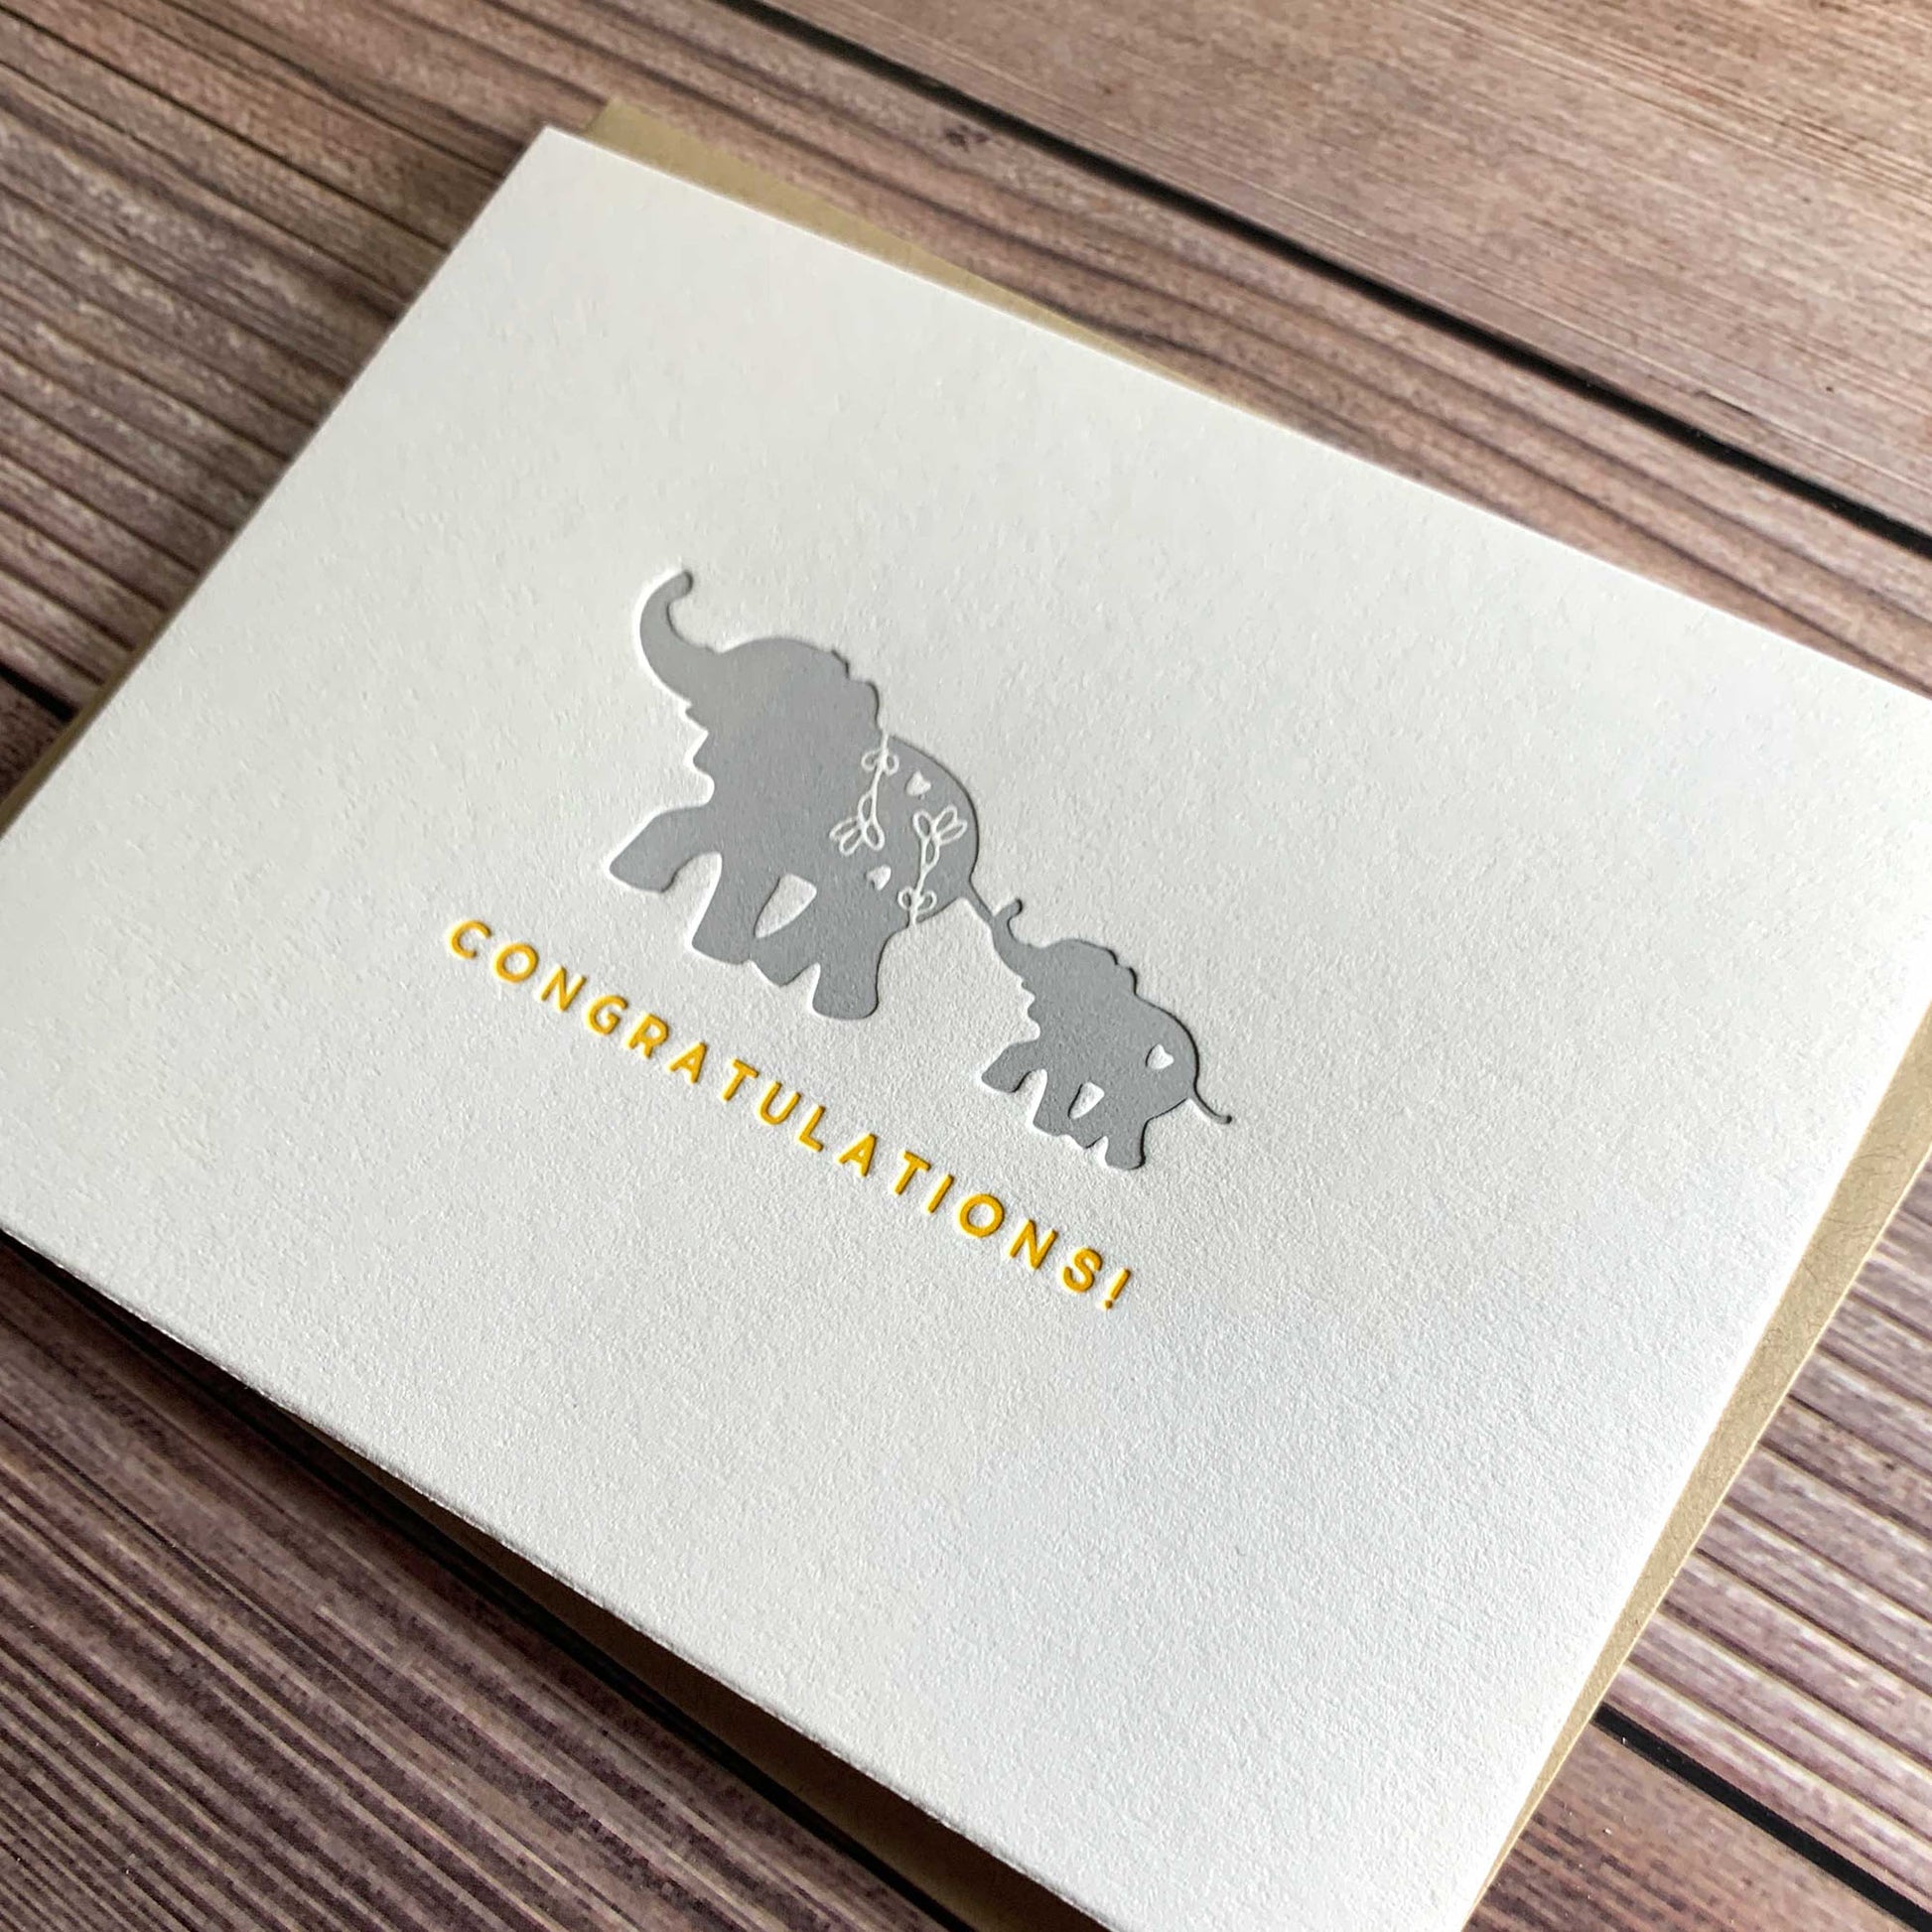 Mom and Baby Elephant, Congratulations! Baby Card, Letterpress printed, view shows letterpress impression, includes envelope